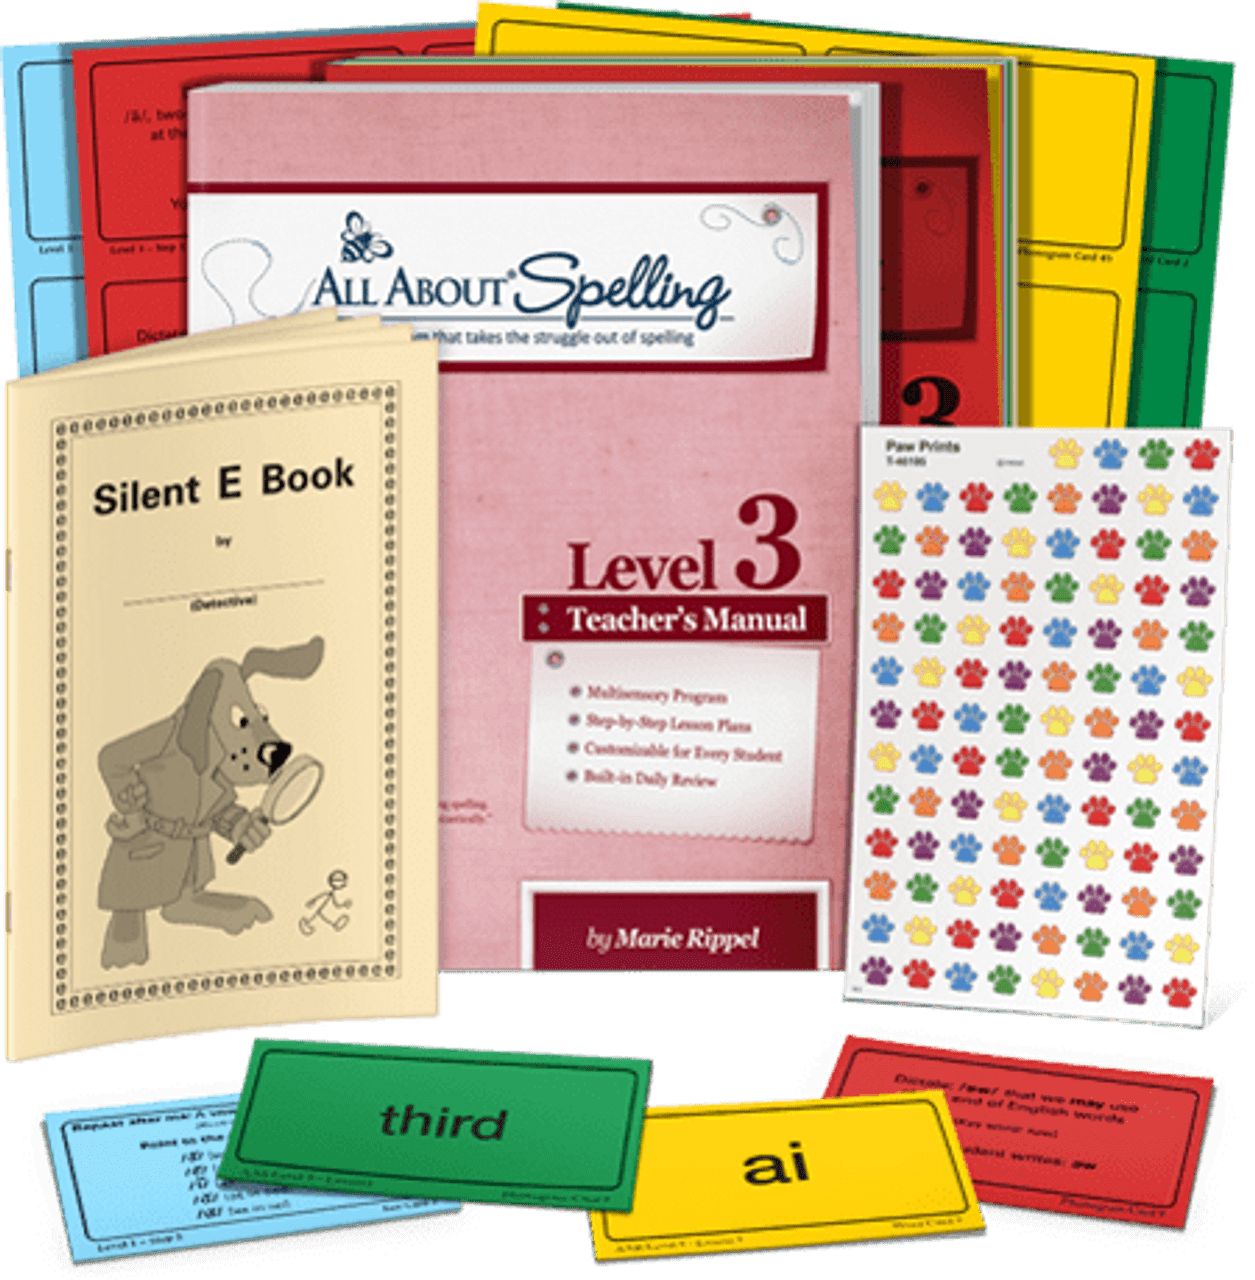 All About Spelling Level 3 Materials - All About Learning Press, Inc.